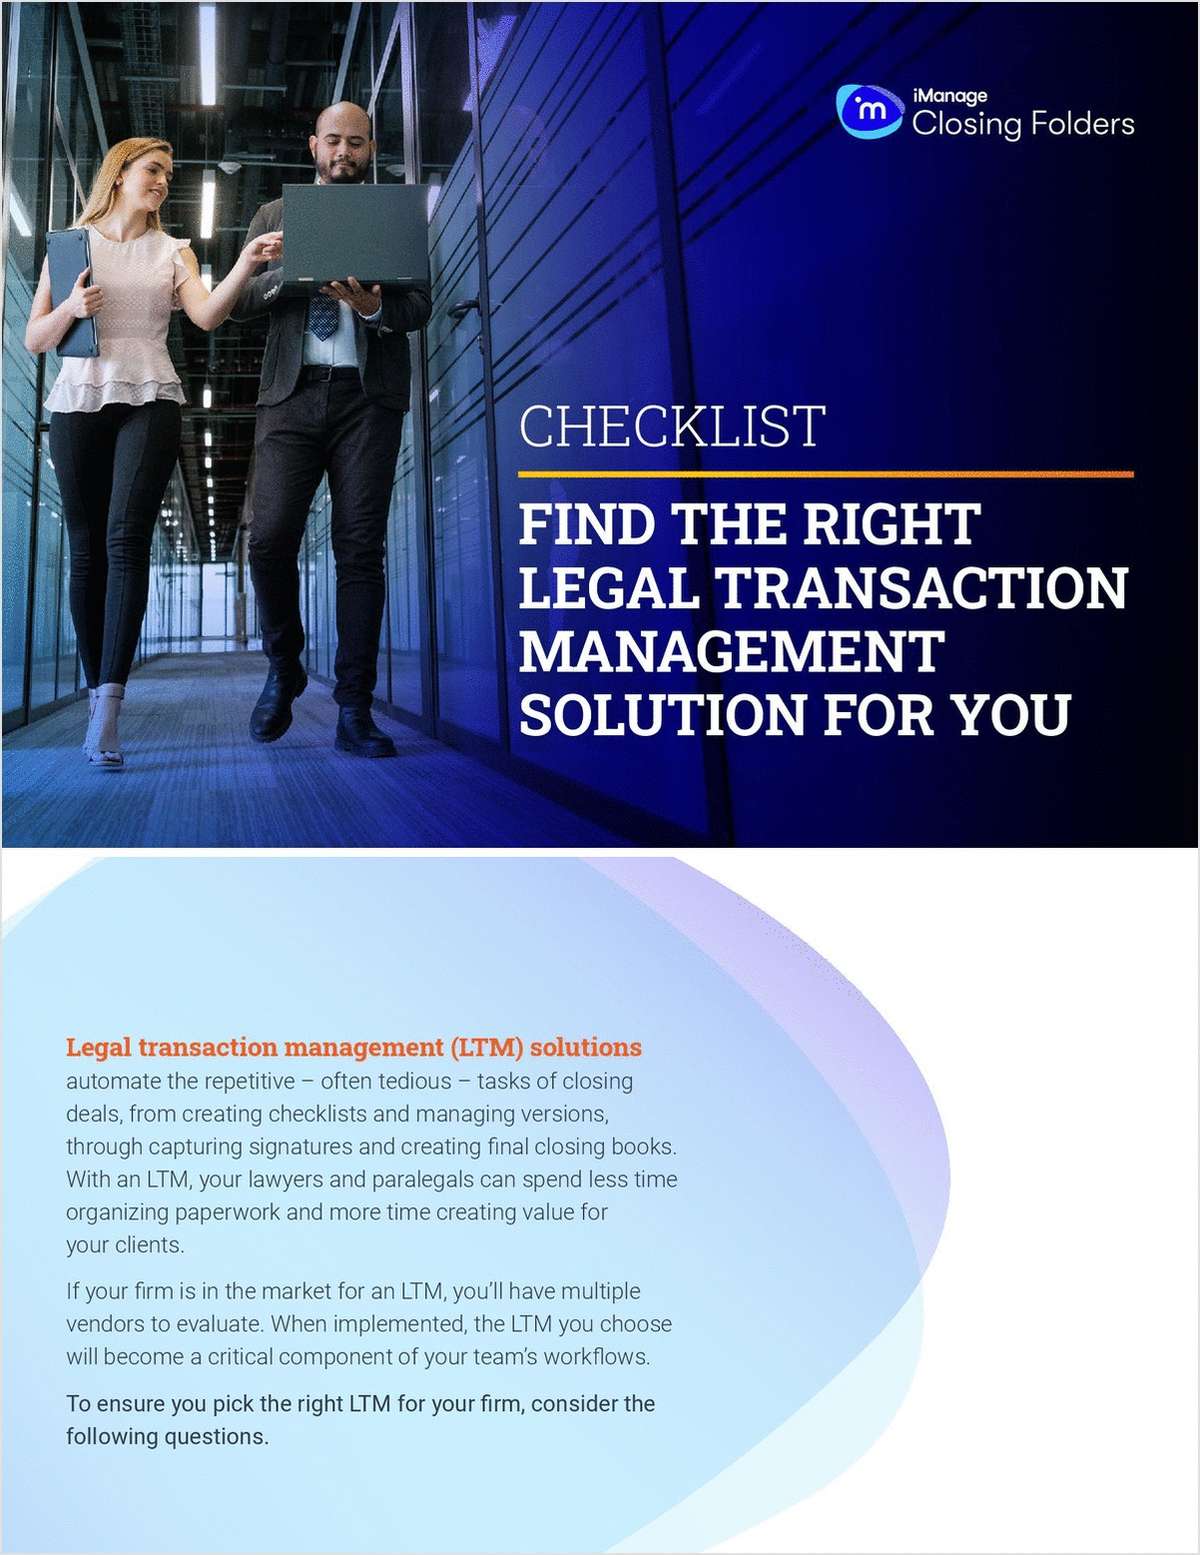 Legal transaction management (LTM) solutions are increasingly necessary to close deals efficiently, but finding the right one for your firm can be overwhelming. This checklist breaks down specific questions to ask yourself in order to find the right solution for your firm.